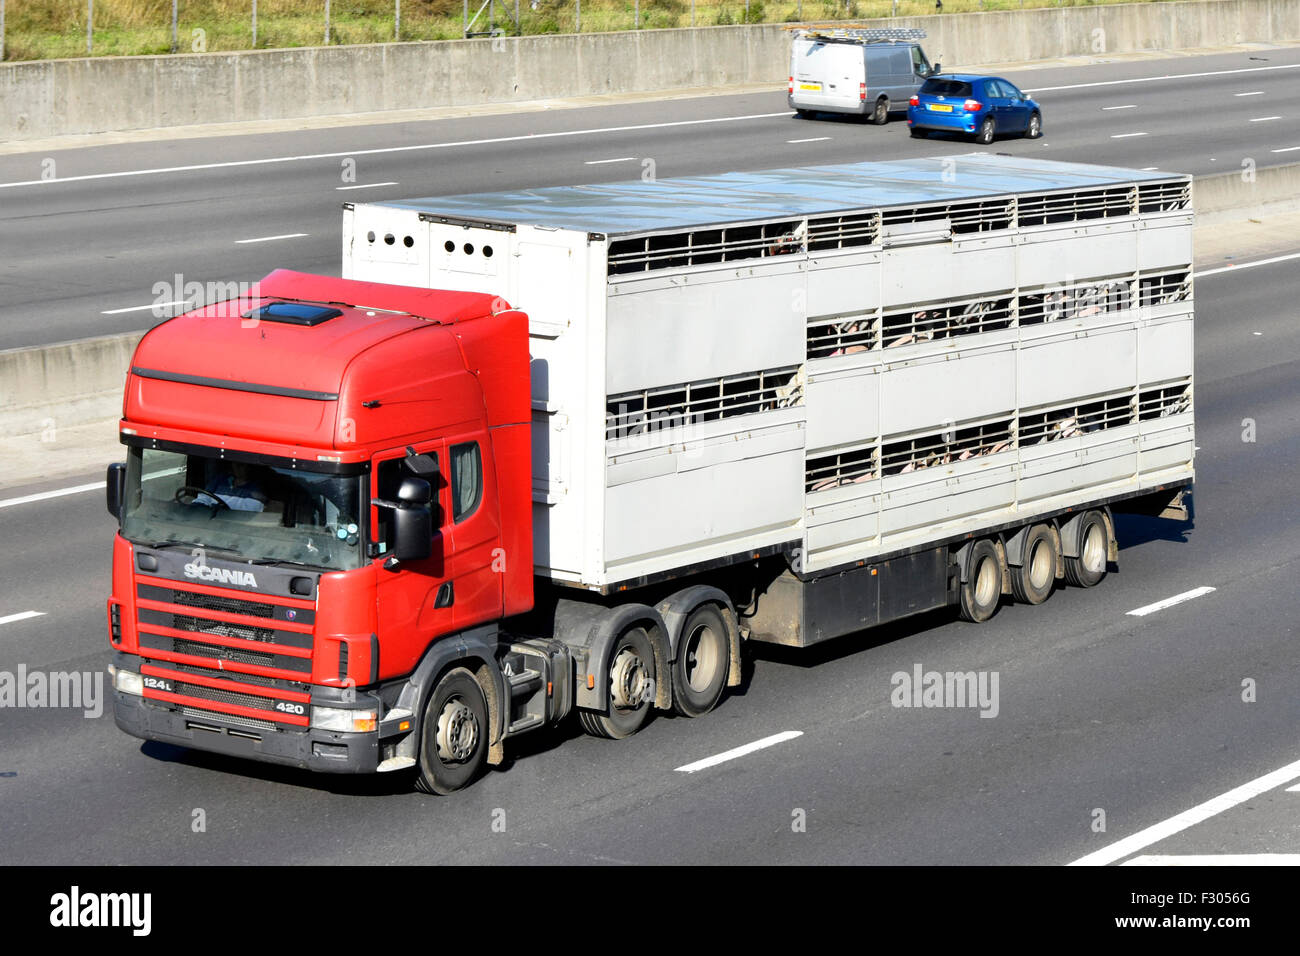 Livestock visible being transported in unmarked articulated trailer & hgv red lorry truck driving along English motorway part of UK food supply chain Stock Photo